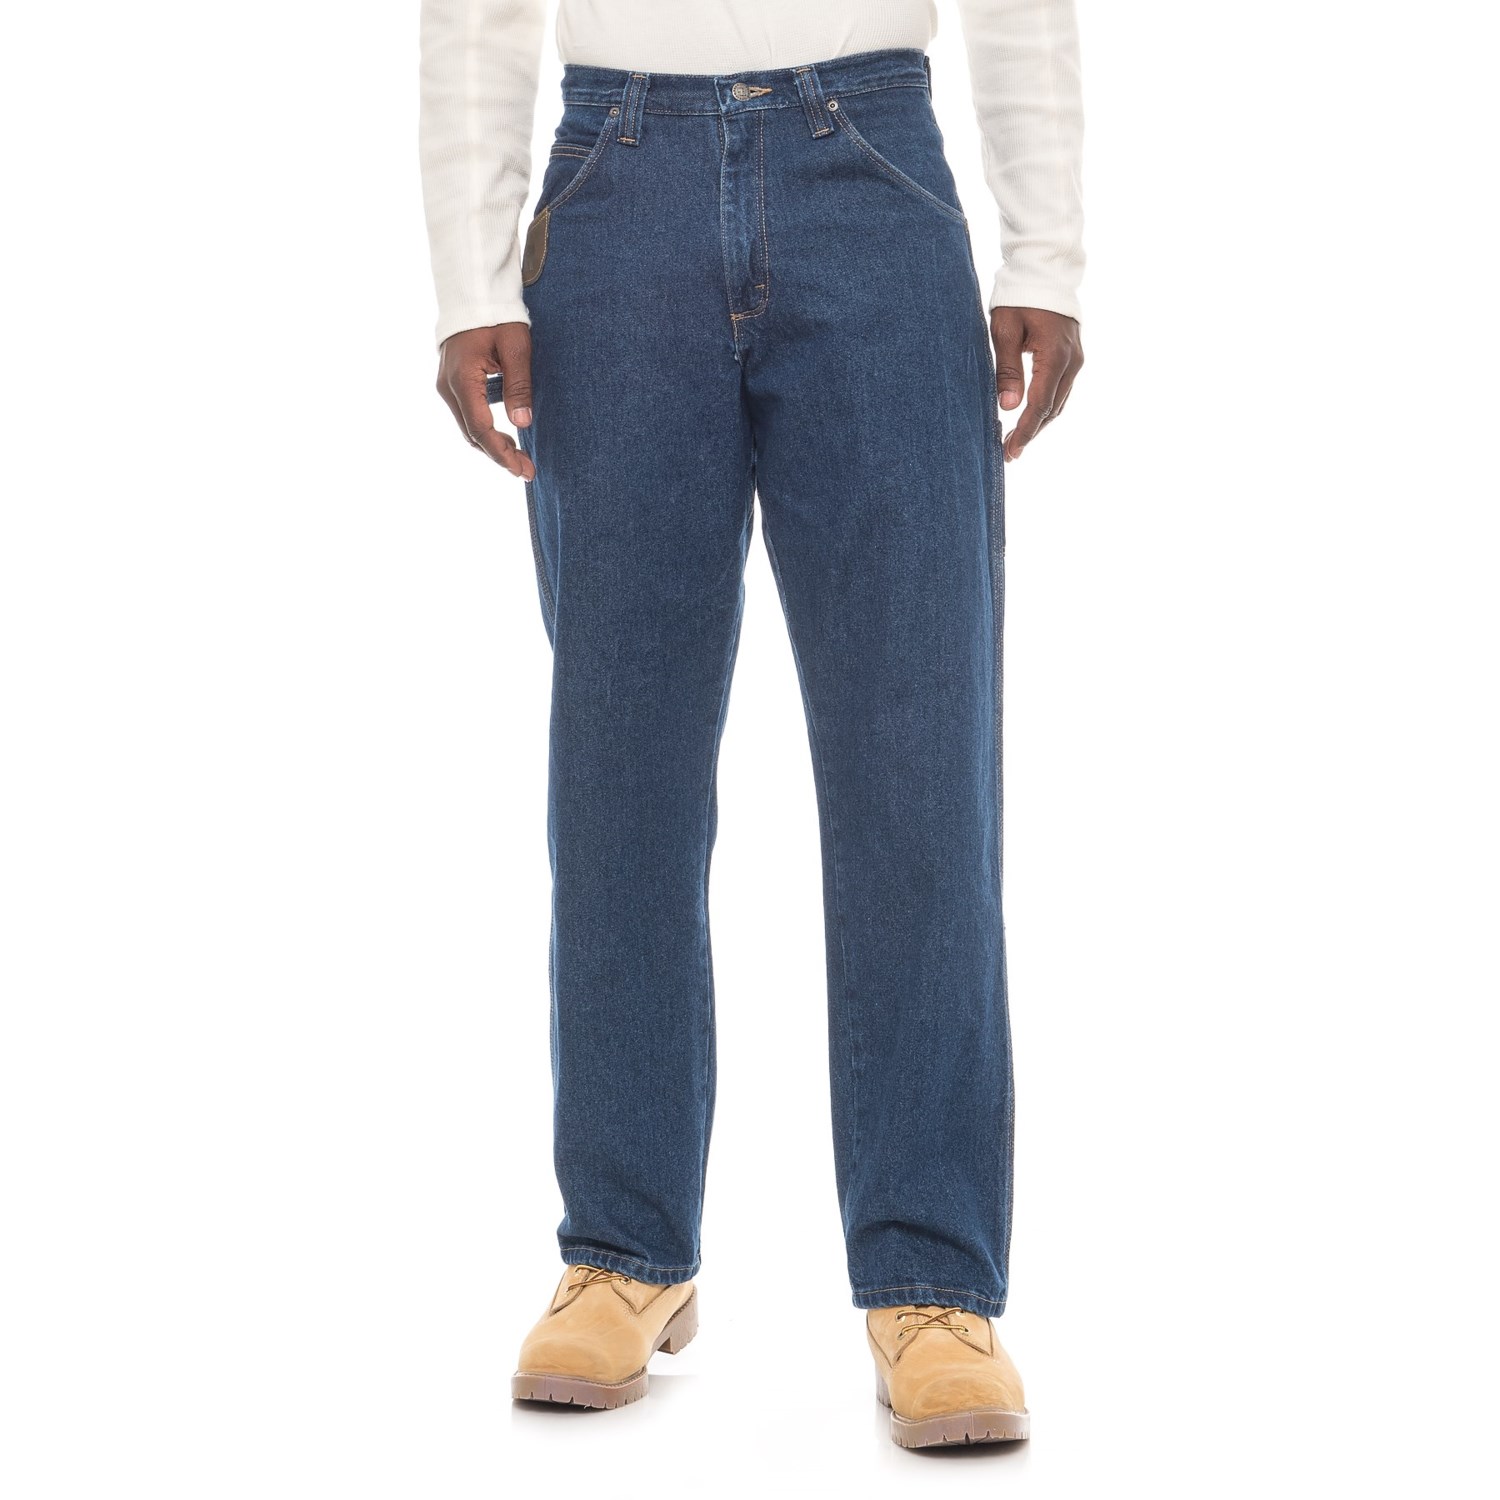 Riggs Workwear® Carpenter Jeans (For Men) - Save 41%